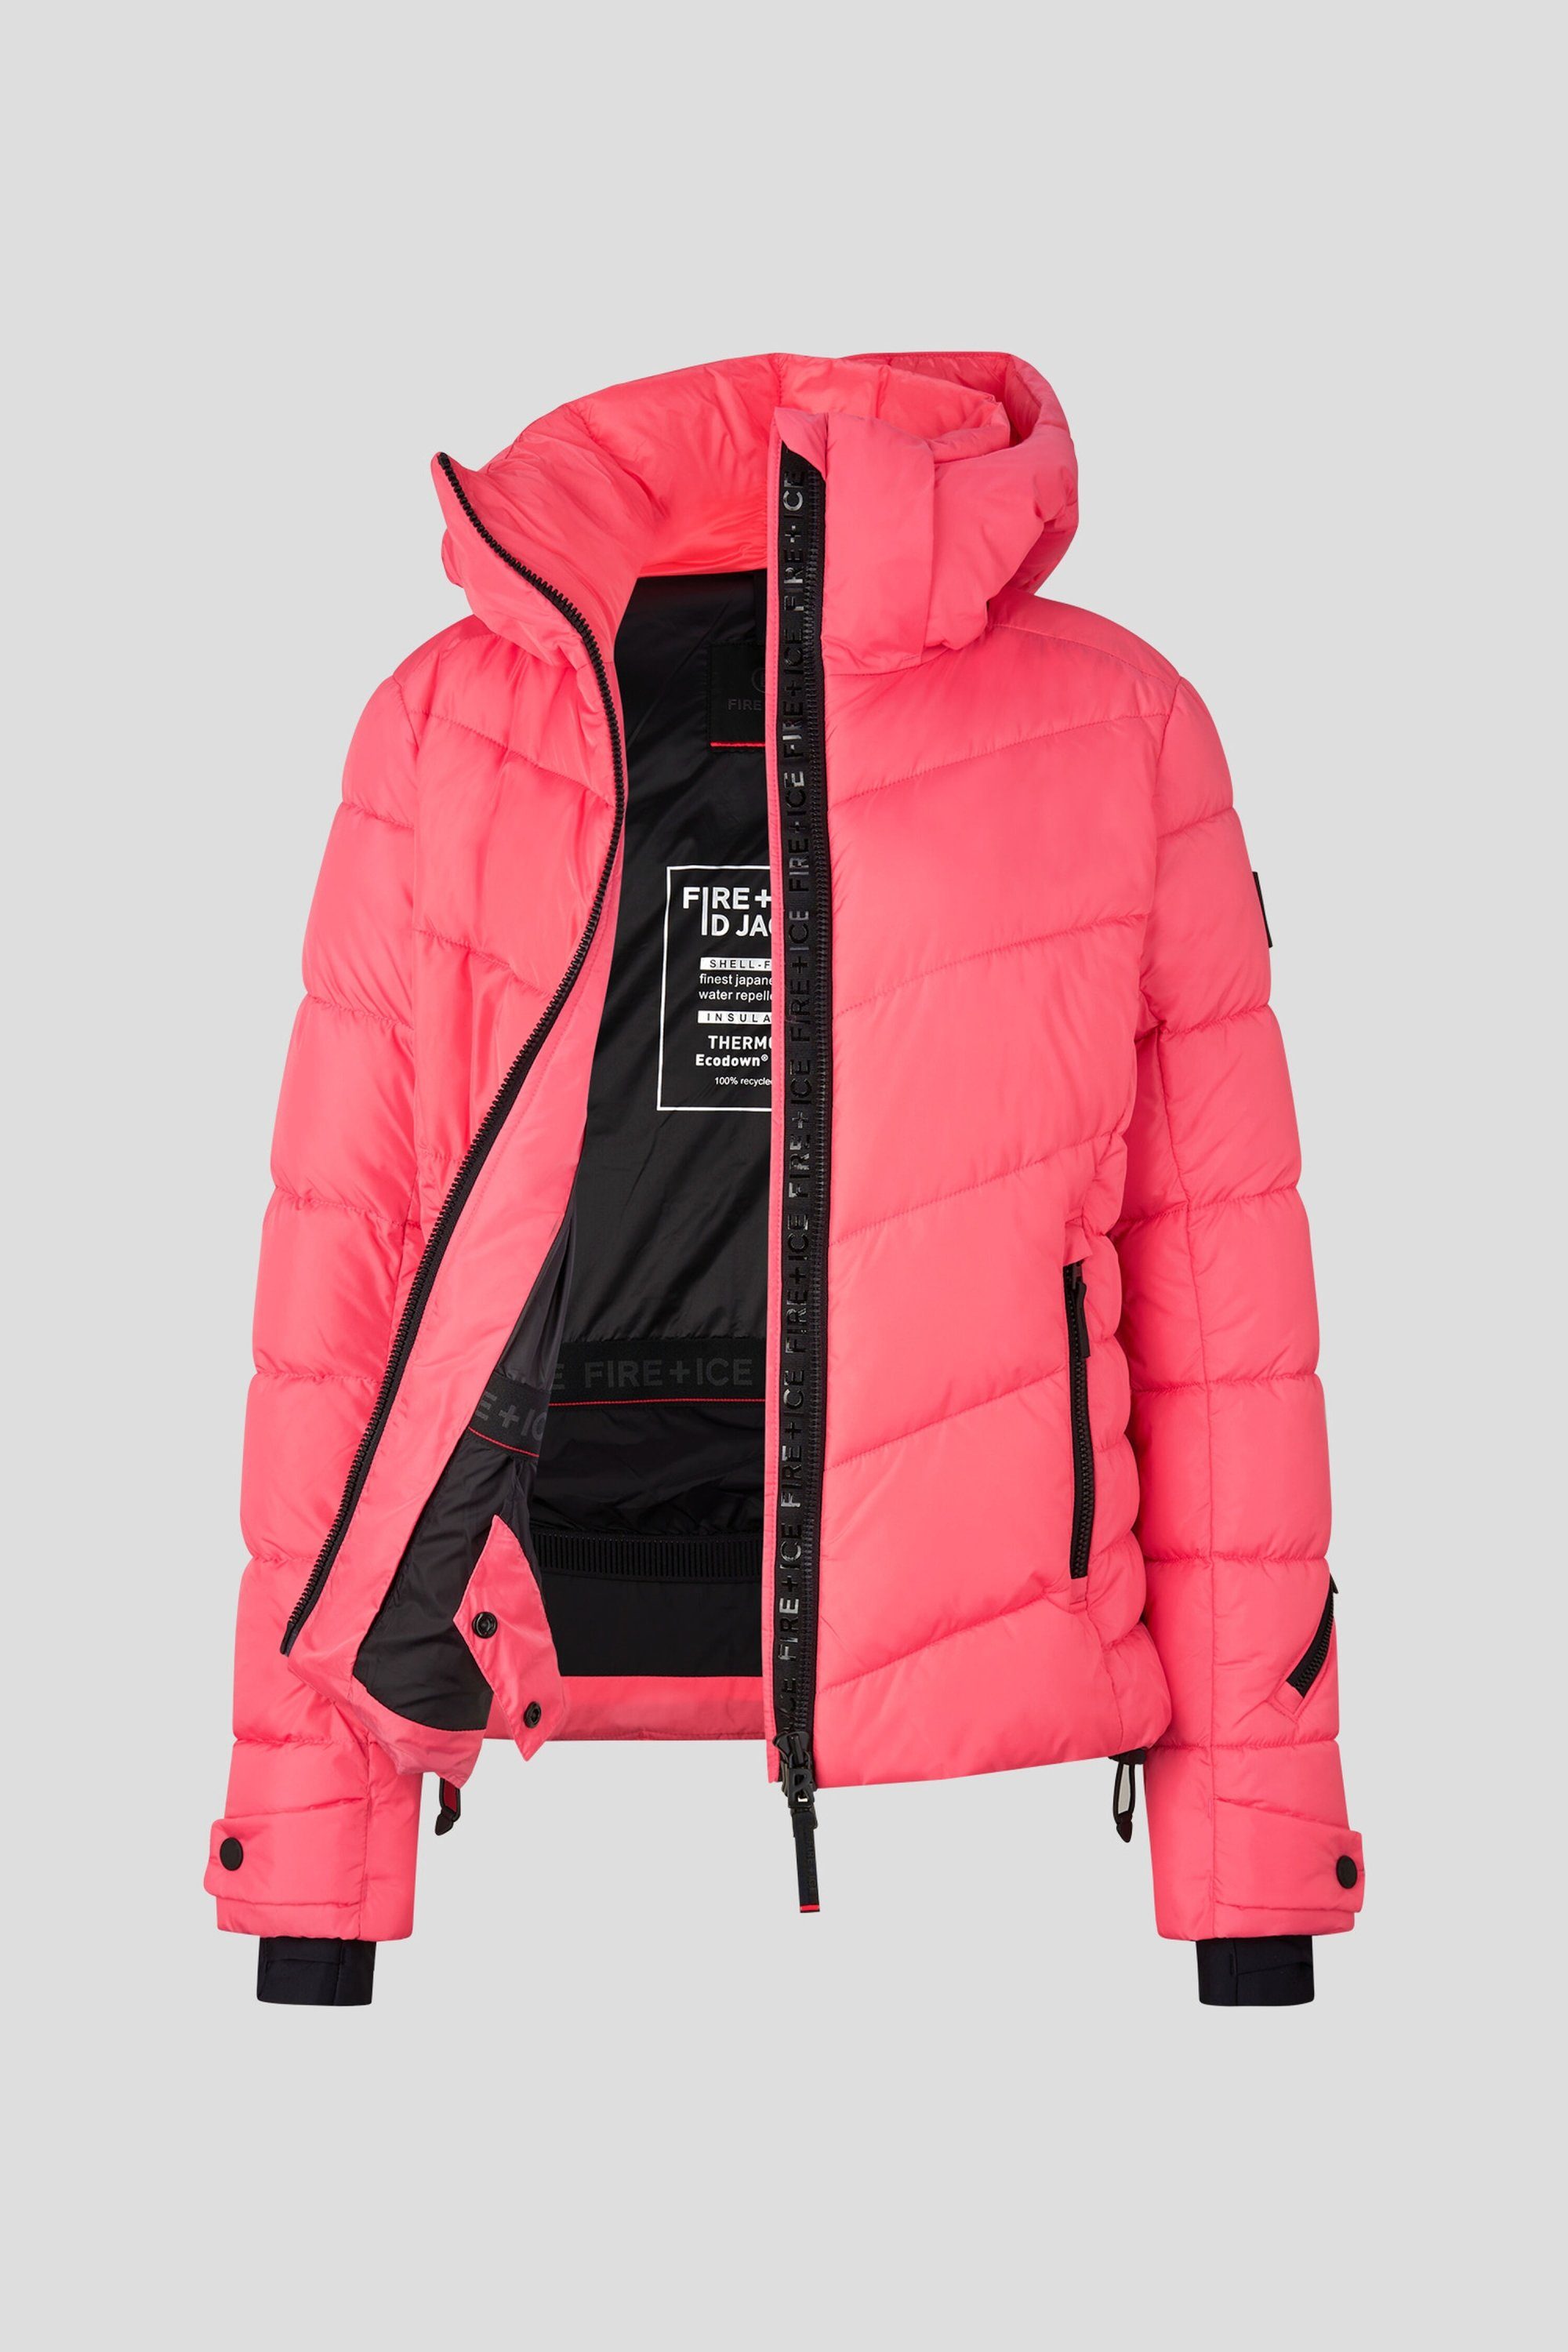 Bogner Fire + Ice Kapuzensweatjacke pink SAELLY2 coral